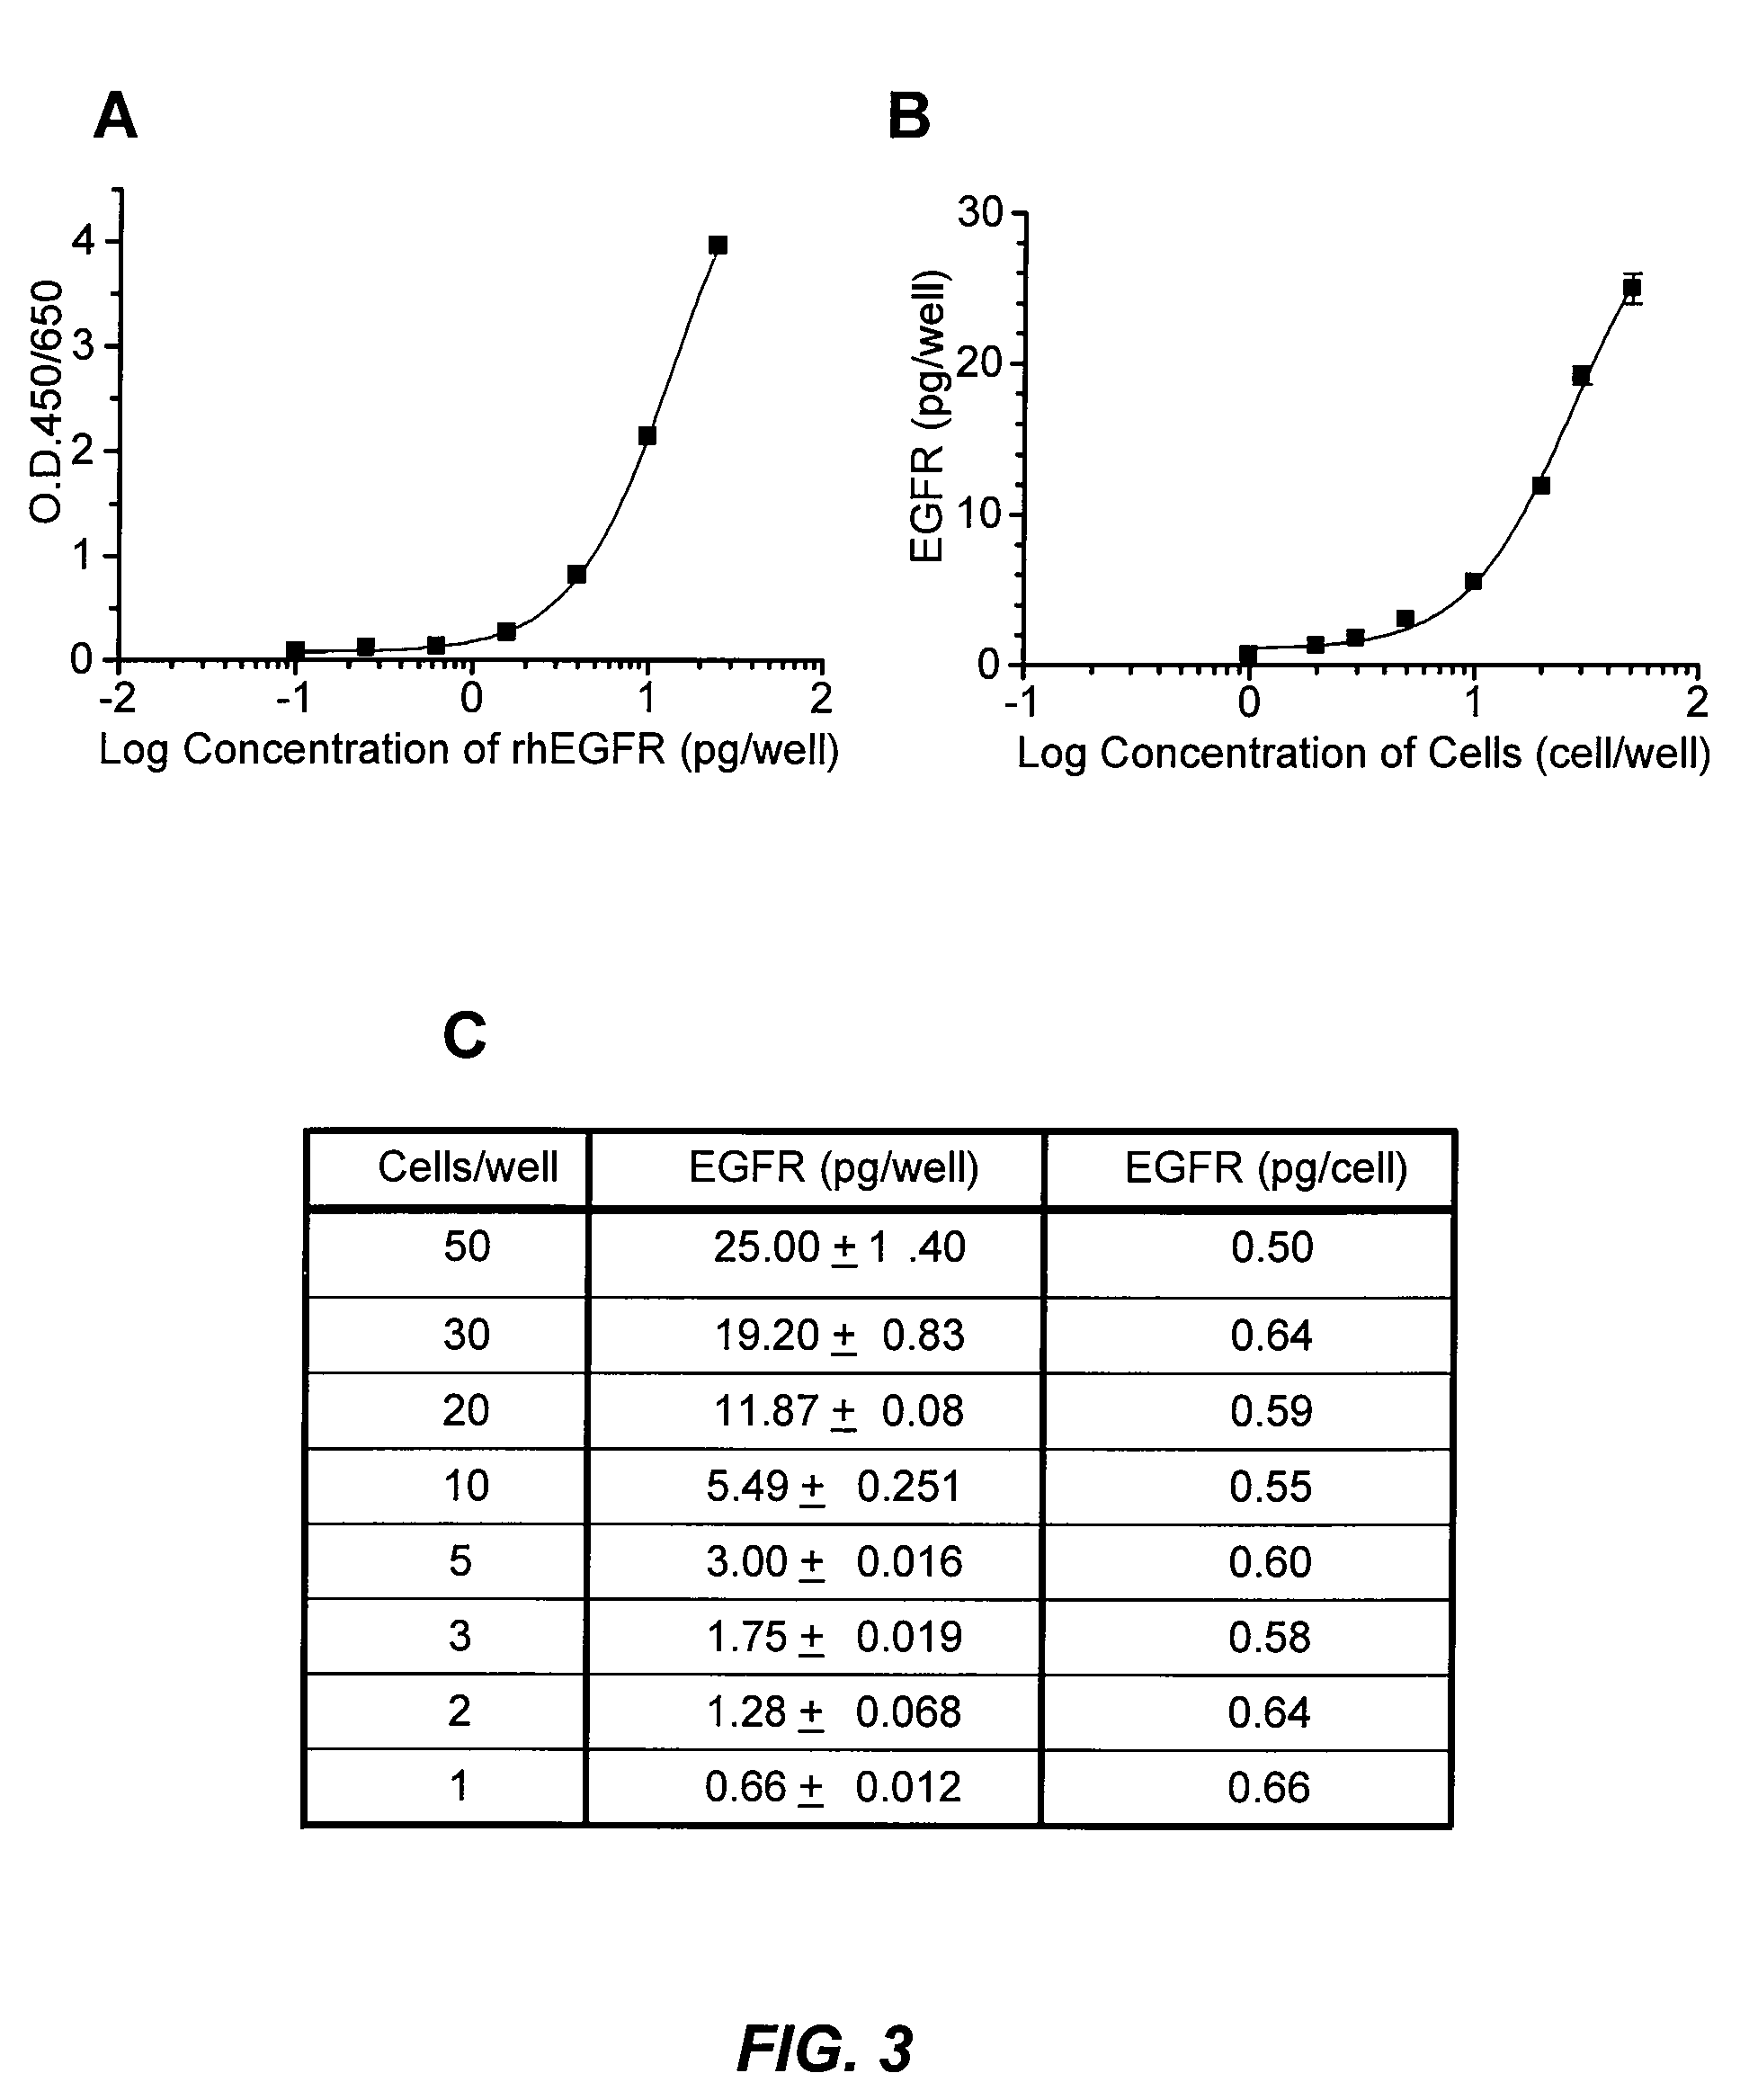 Antibody-based arrays for detecting multiple signal transducers in rate circulating cells